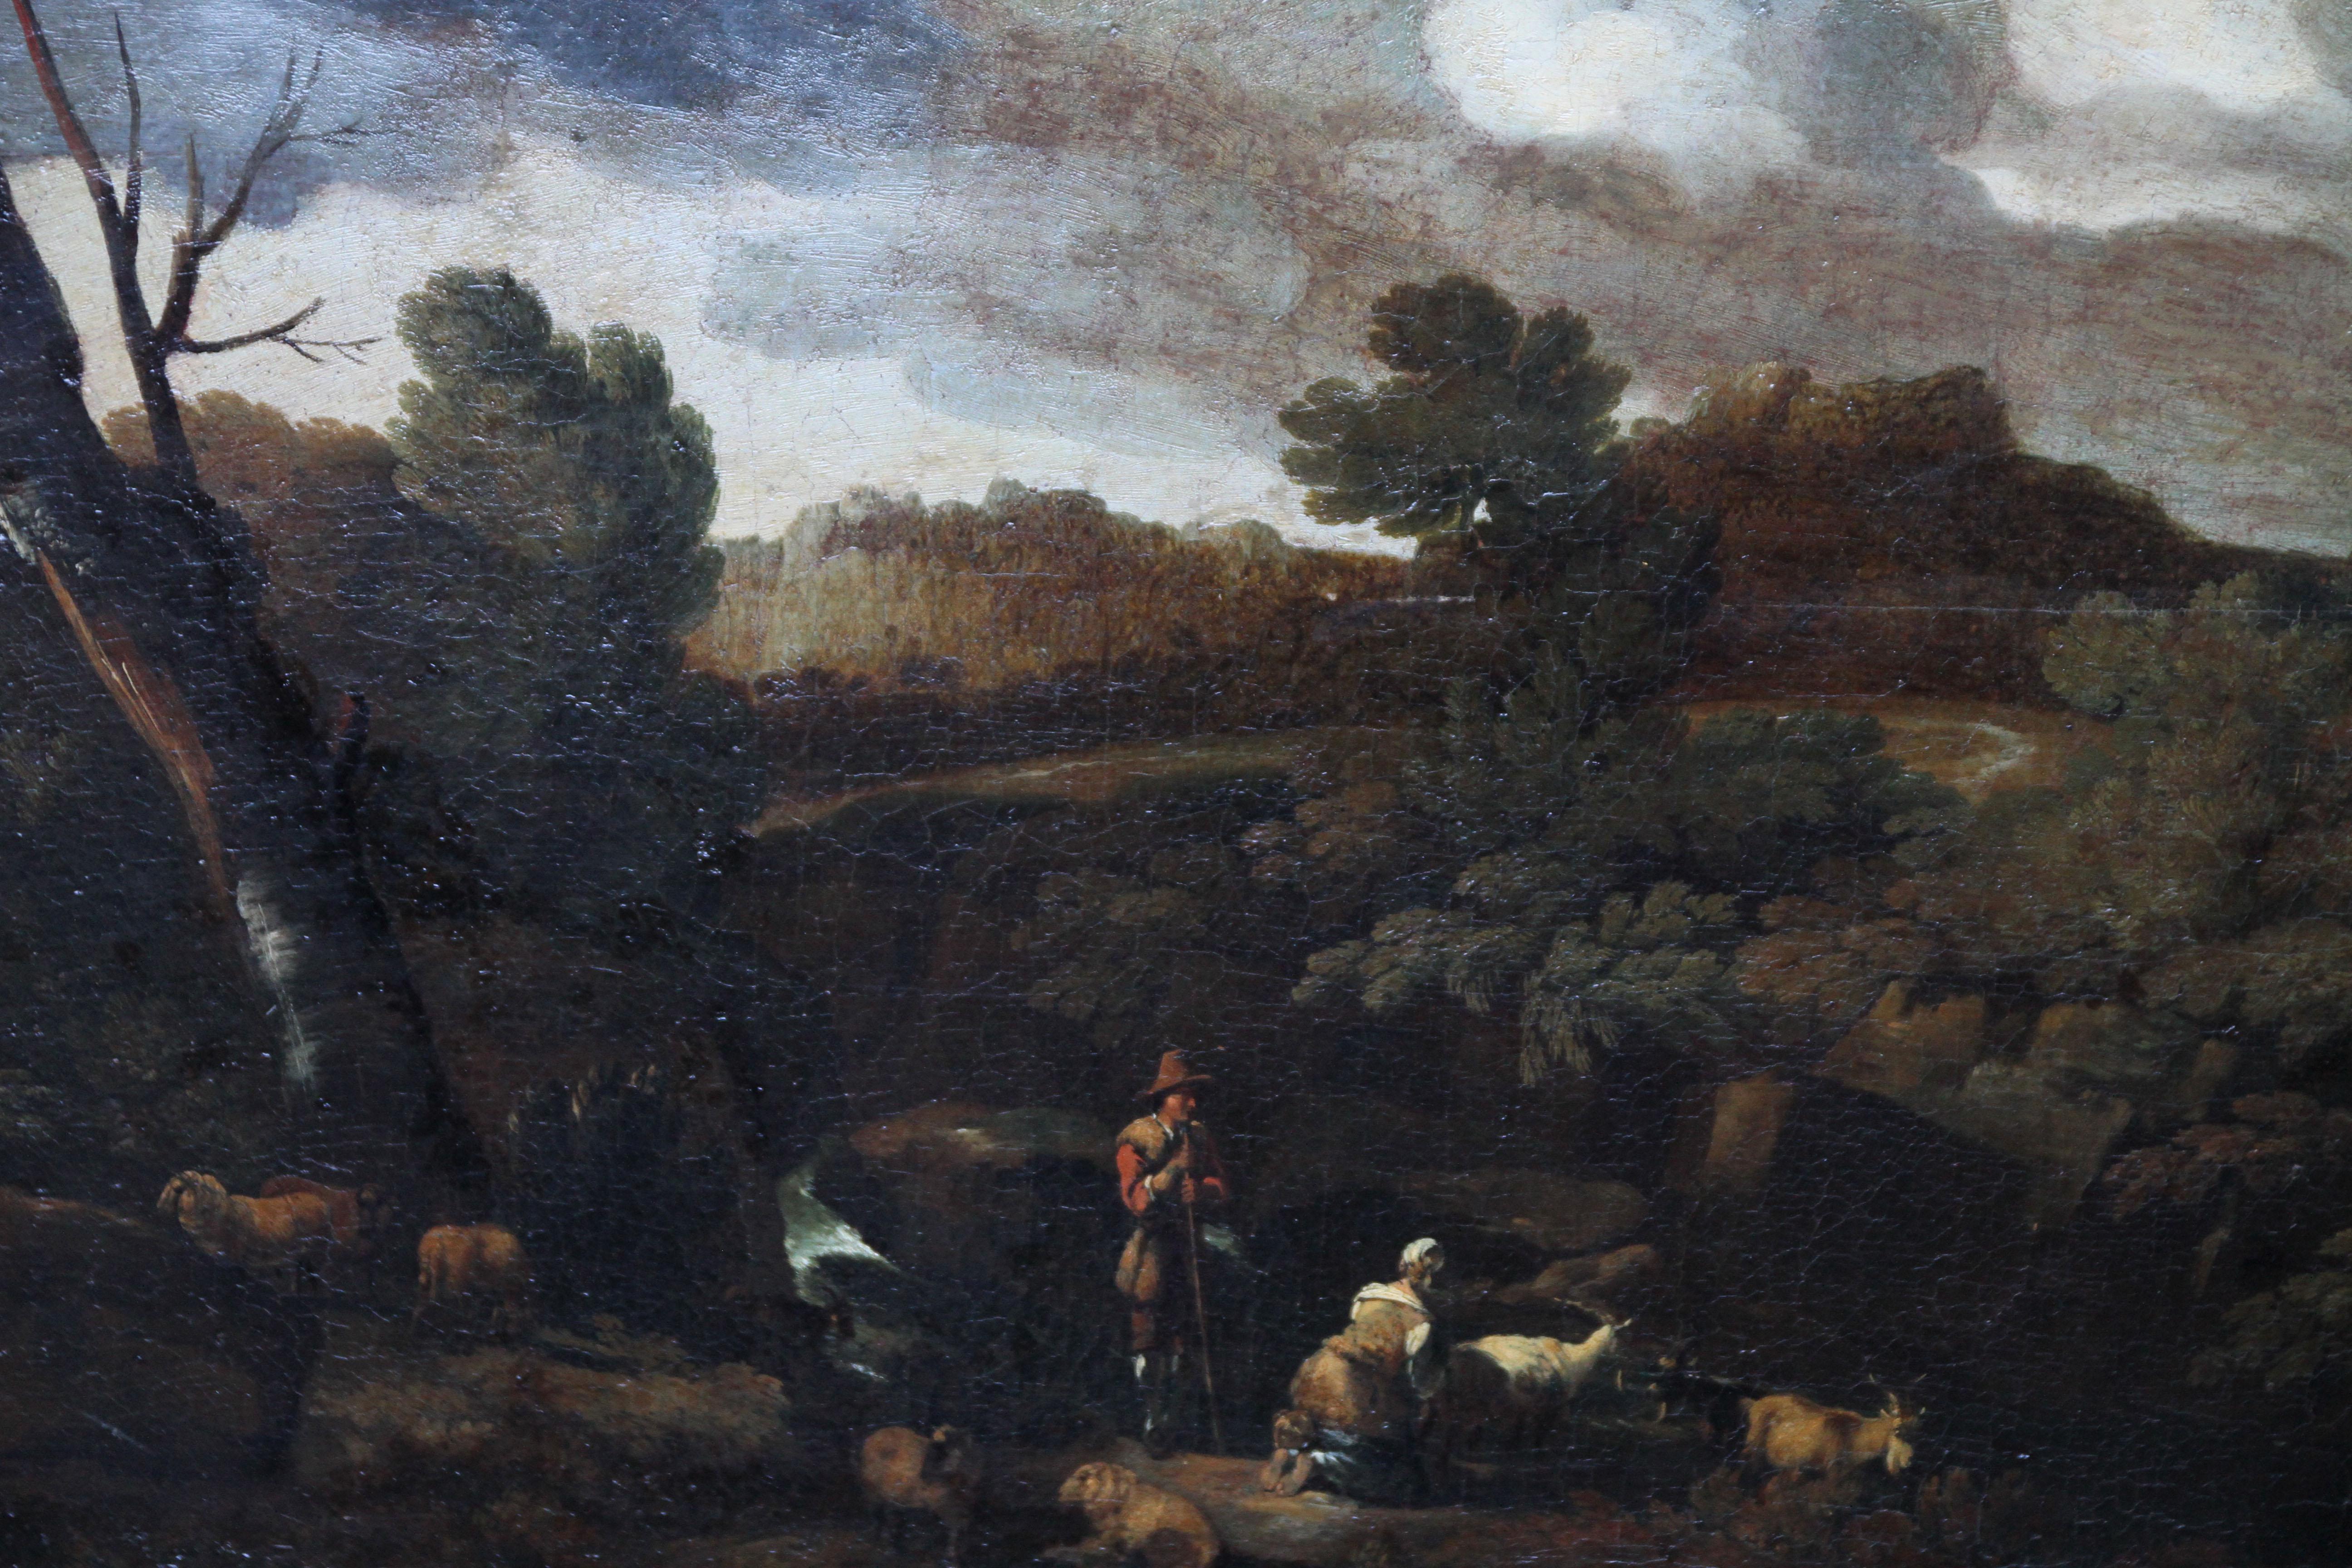 Arcadian Italian Landscape - Old Master 17thC French oil painting herdsman sheep - Maîtres anciens Painting par (Attributed to) Gaspard Dughet